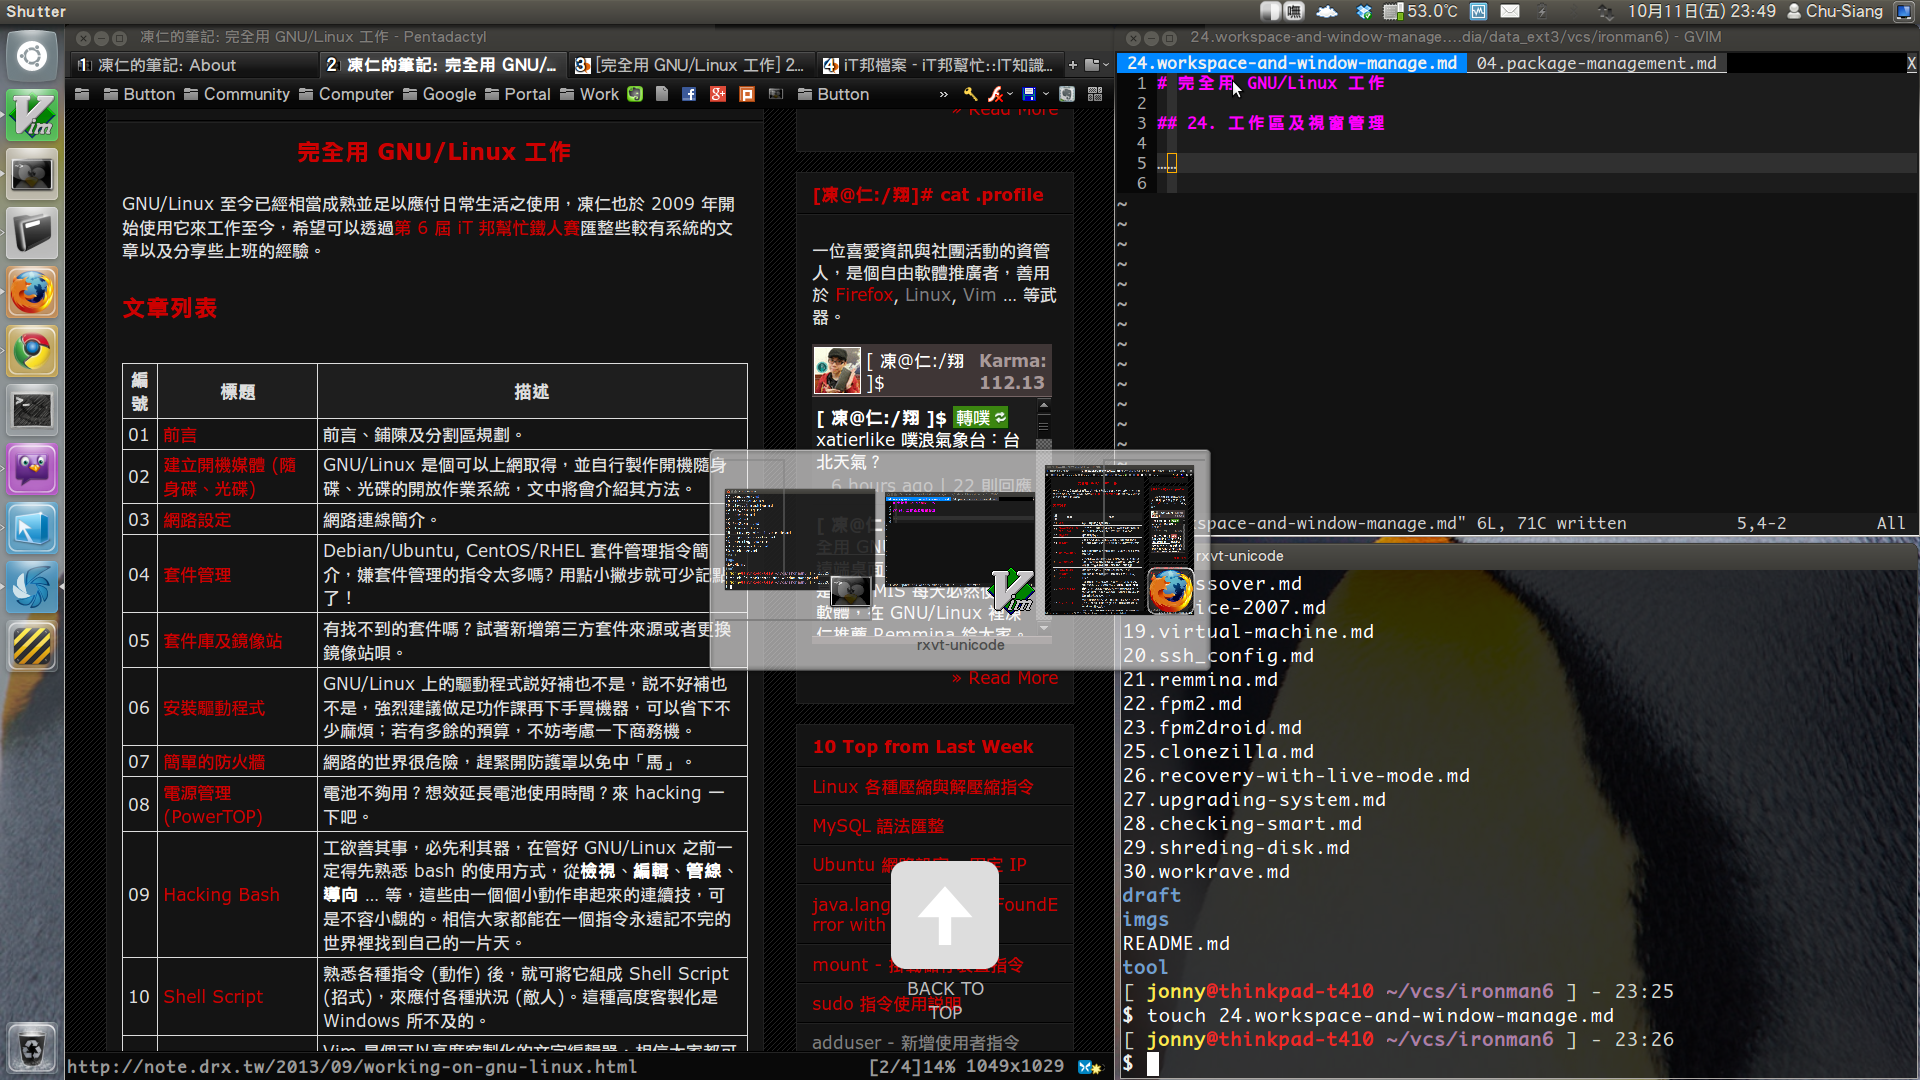 2013-10-11-workspace-and-window-manage-02.png